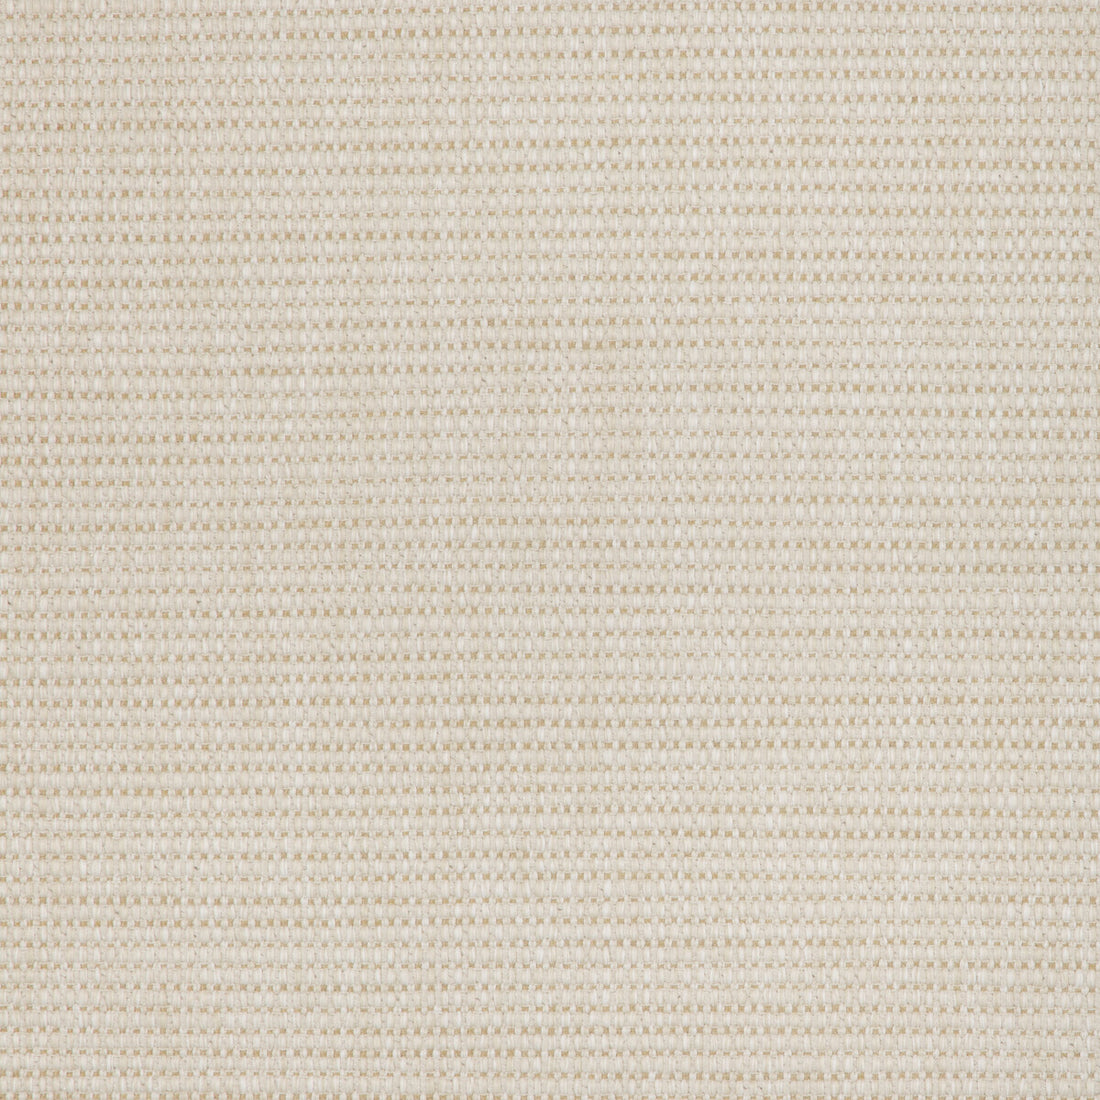 Le Cabas Texture fabric in sand color - pattern 8024115.1616.0 - by Brunschwig &amp; Fils in the Les Ensembliers L&